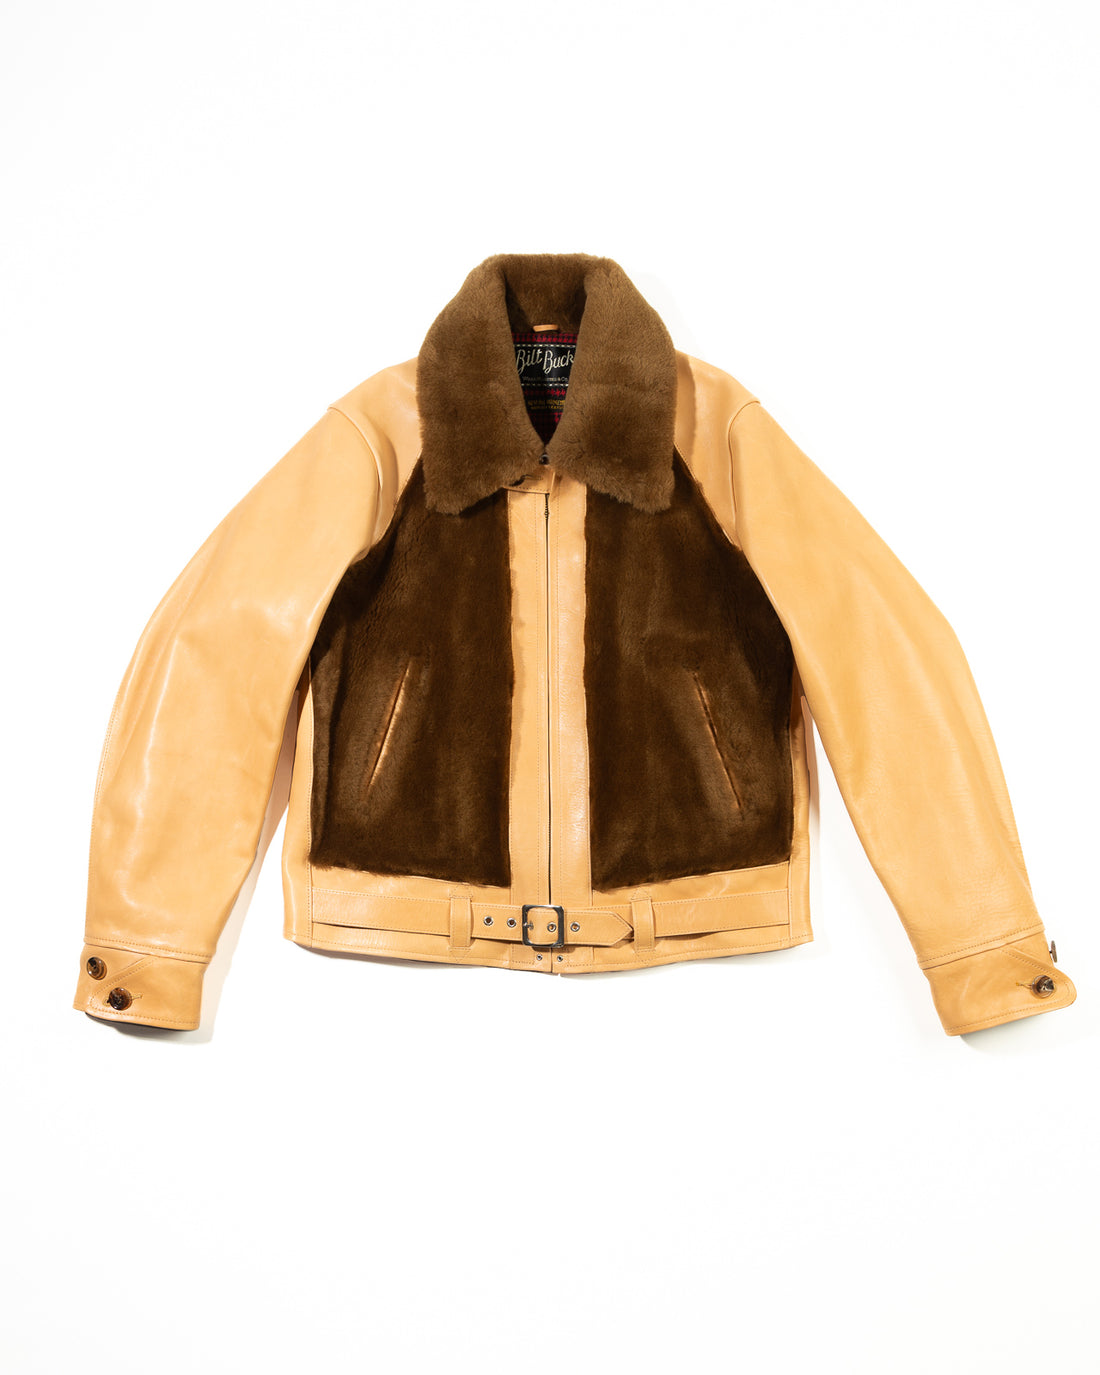 Attractions S&S x Attractions Grizzly Jacket - Brown Mouton - Standard & Strange